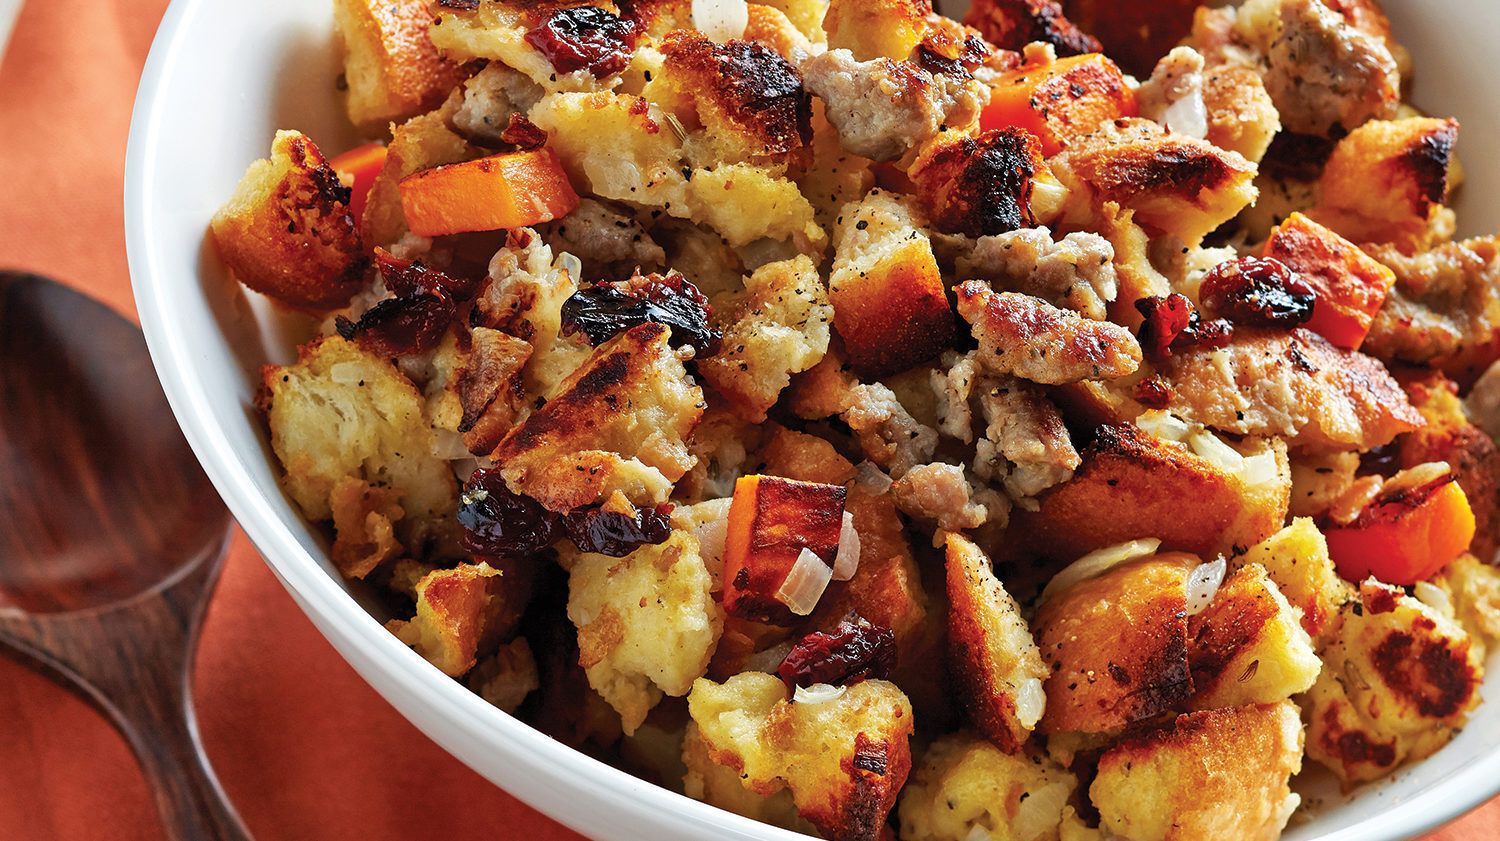 Barbecued Sausage, Sweet Potato & Cherry Stuffing